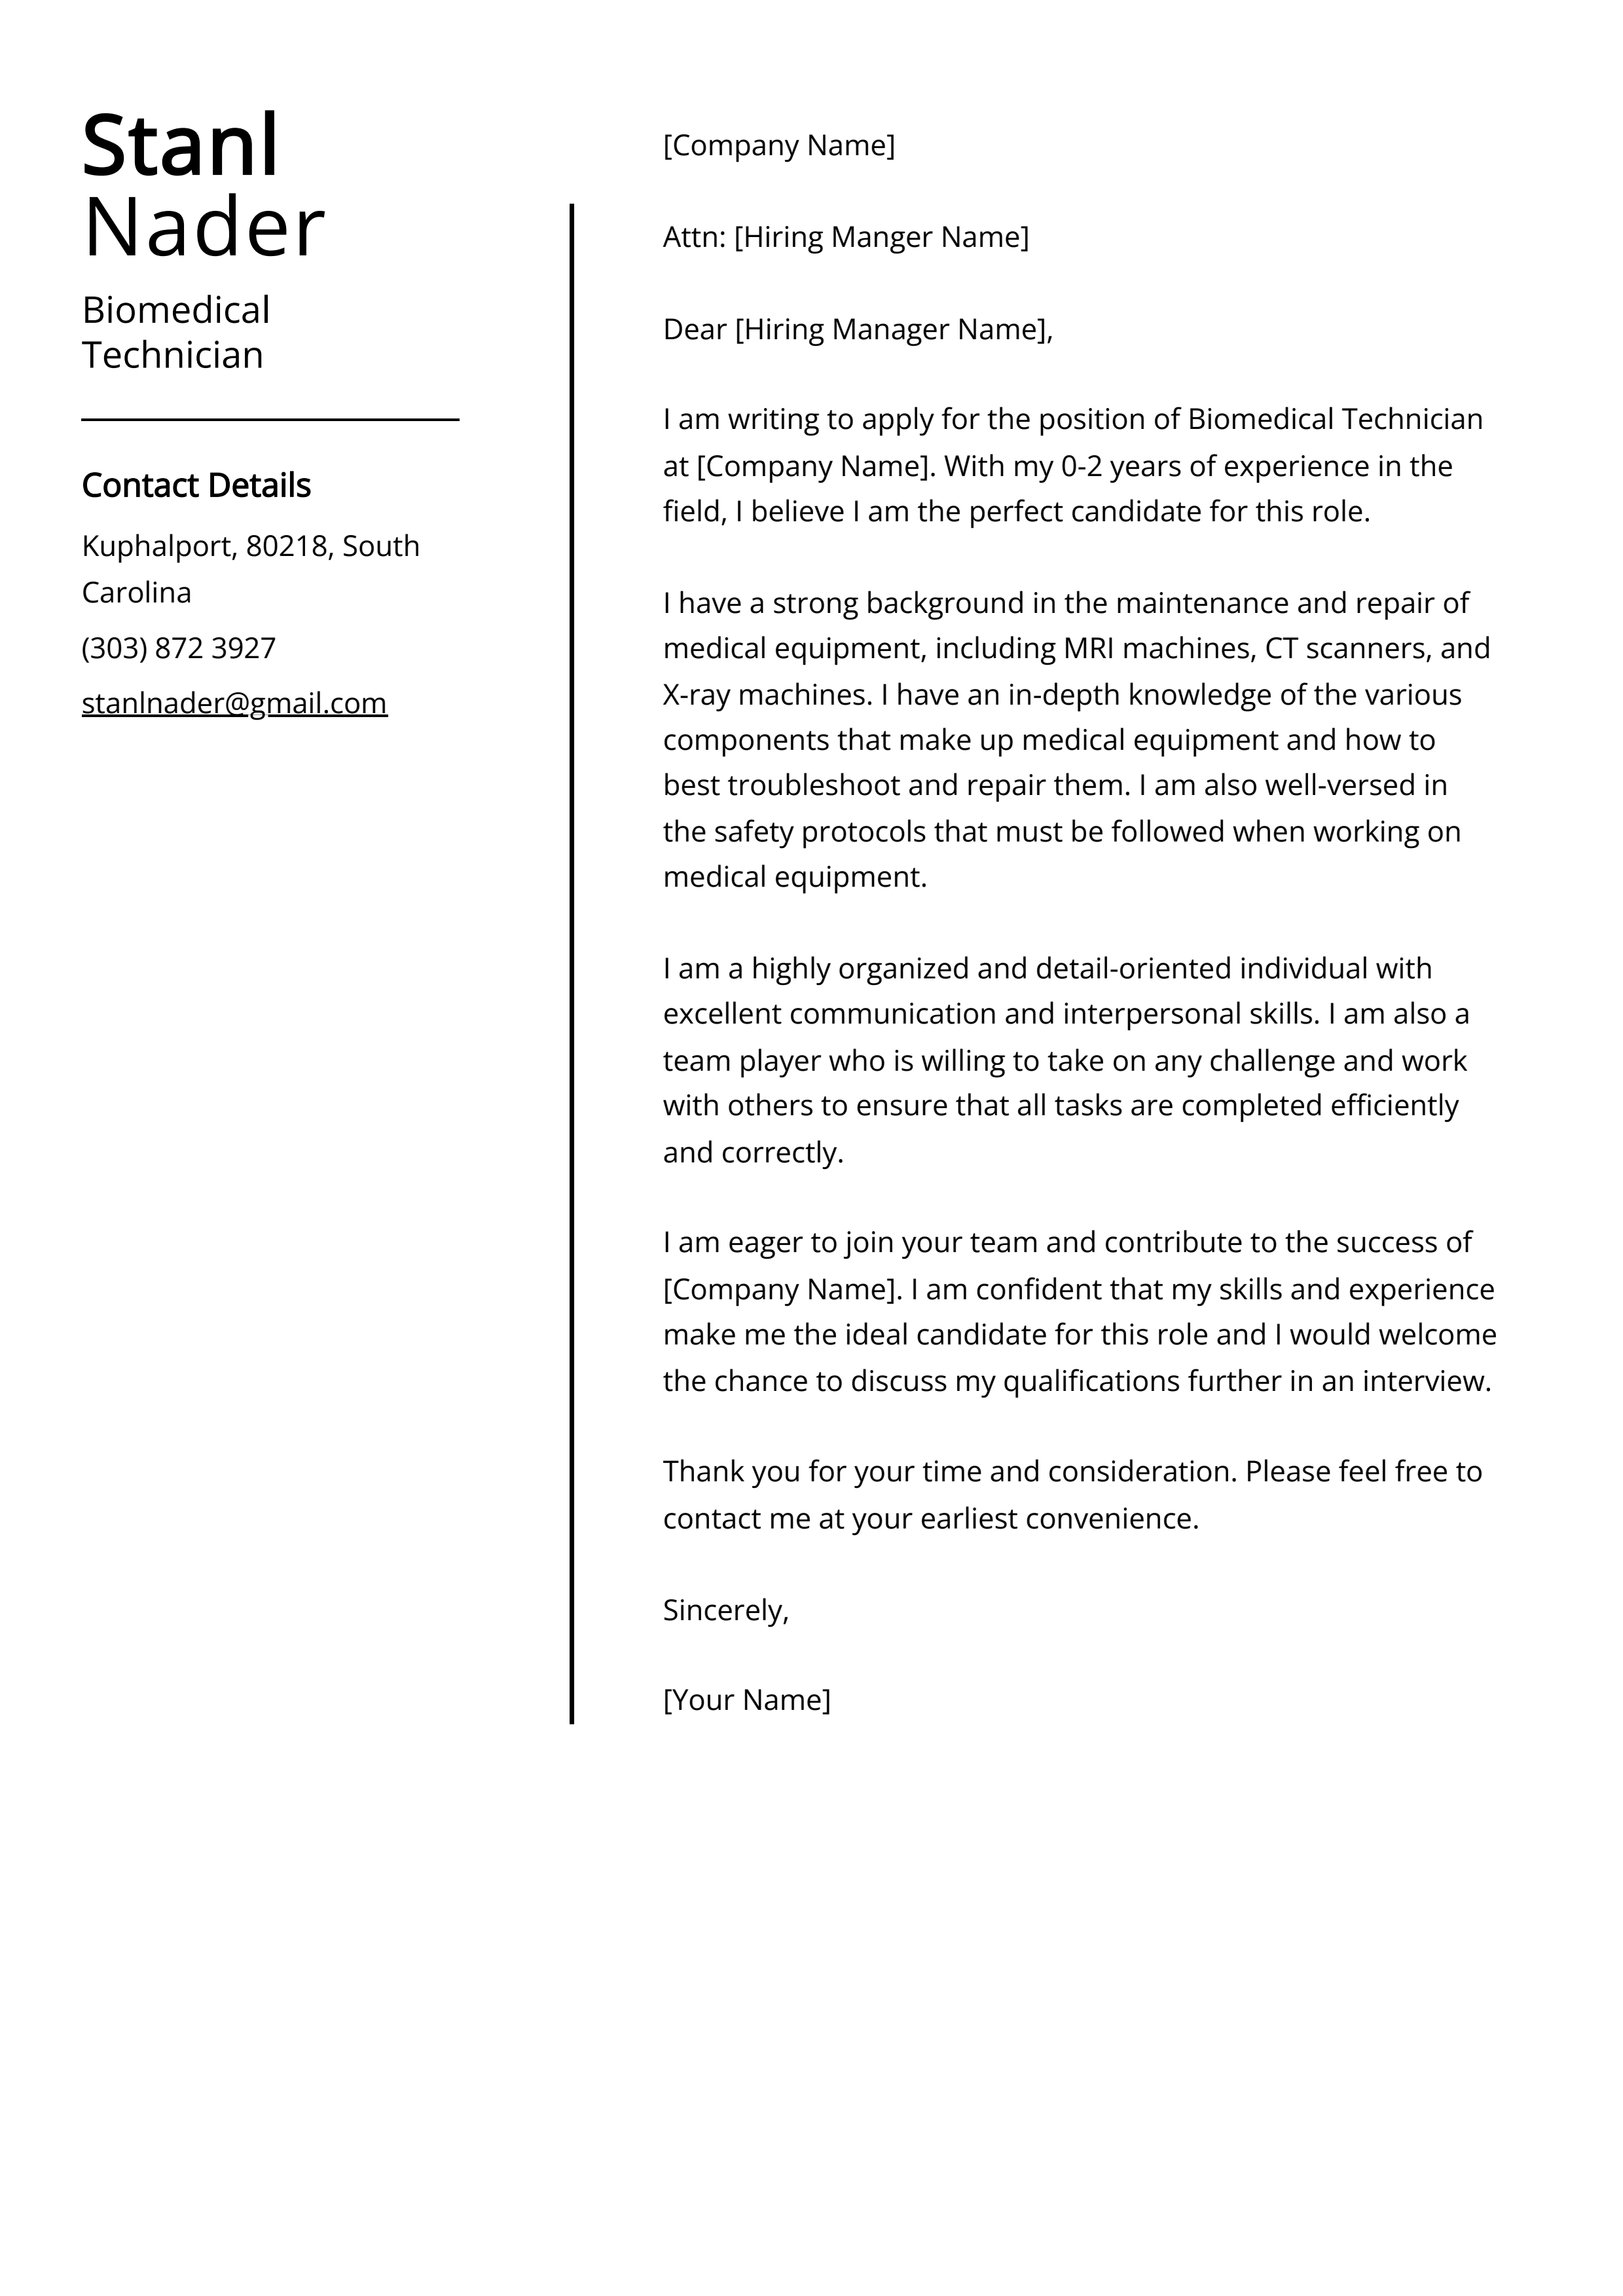 Biomedical Technician Cover Letter Example